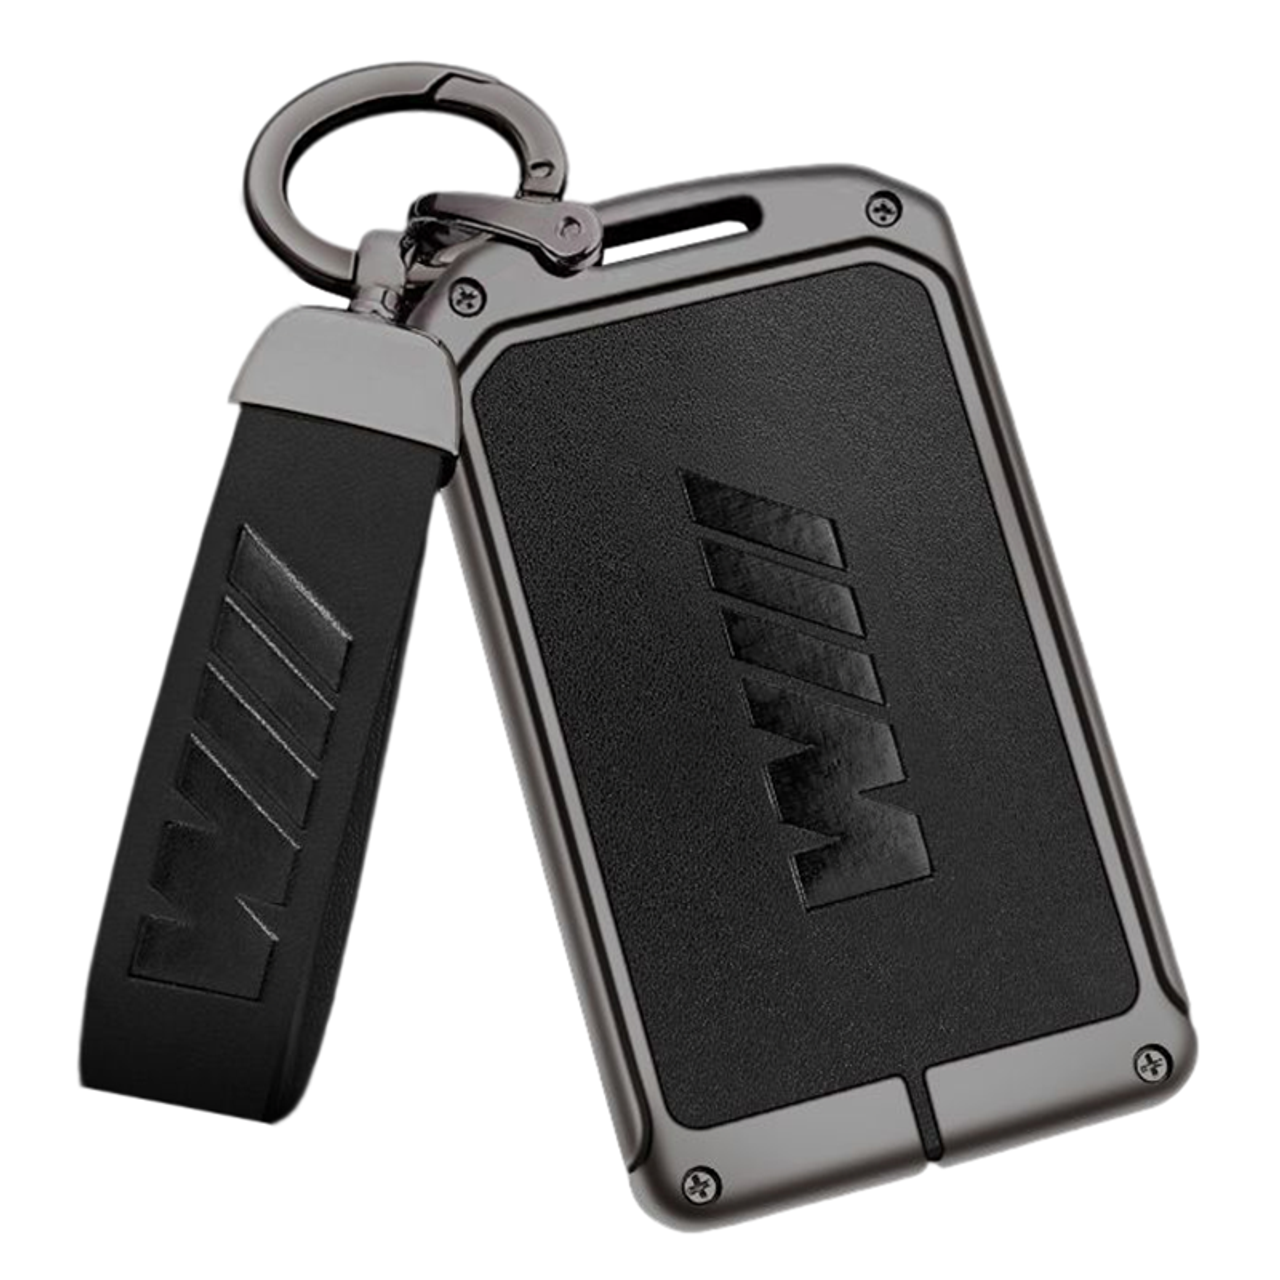 BMW M Power Сase Remote Key, Keychain - Different Colors